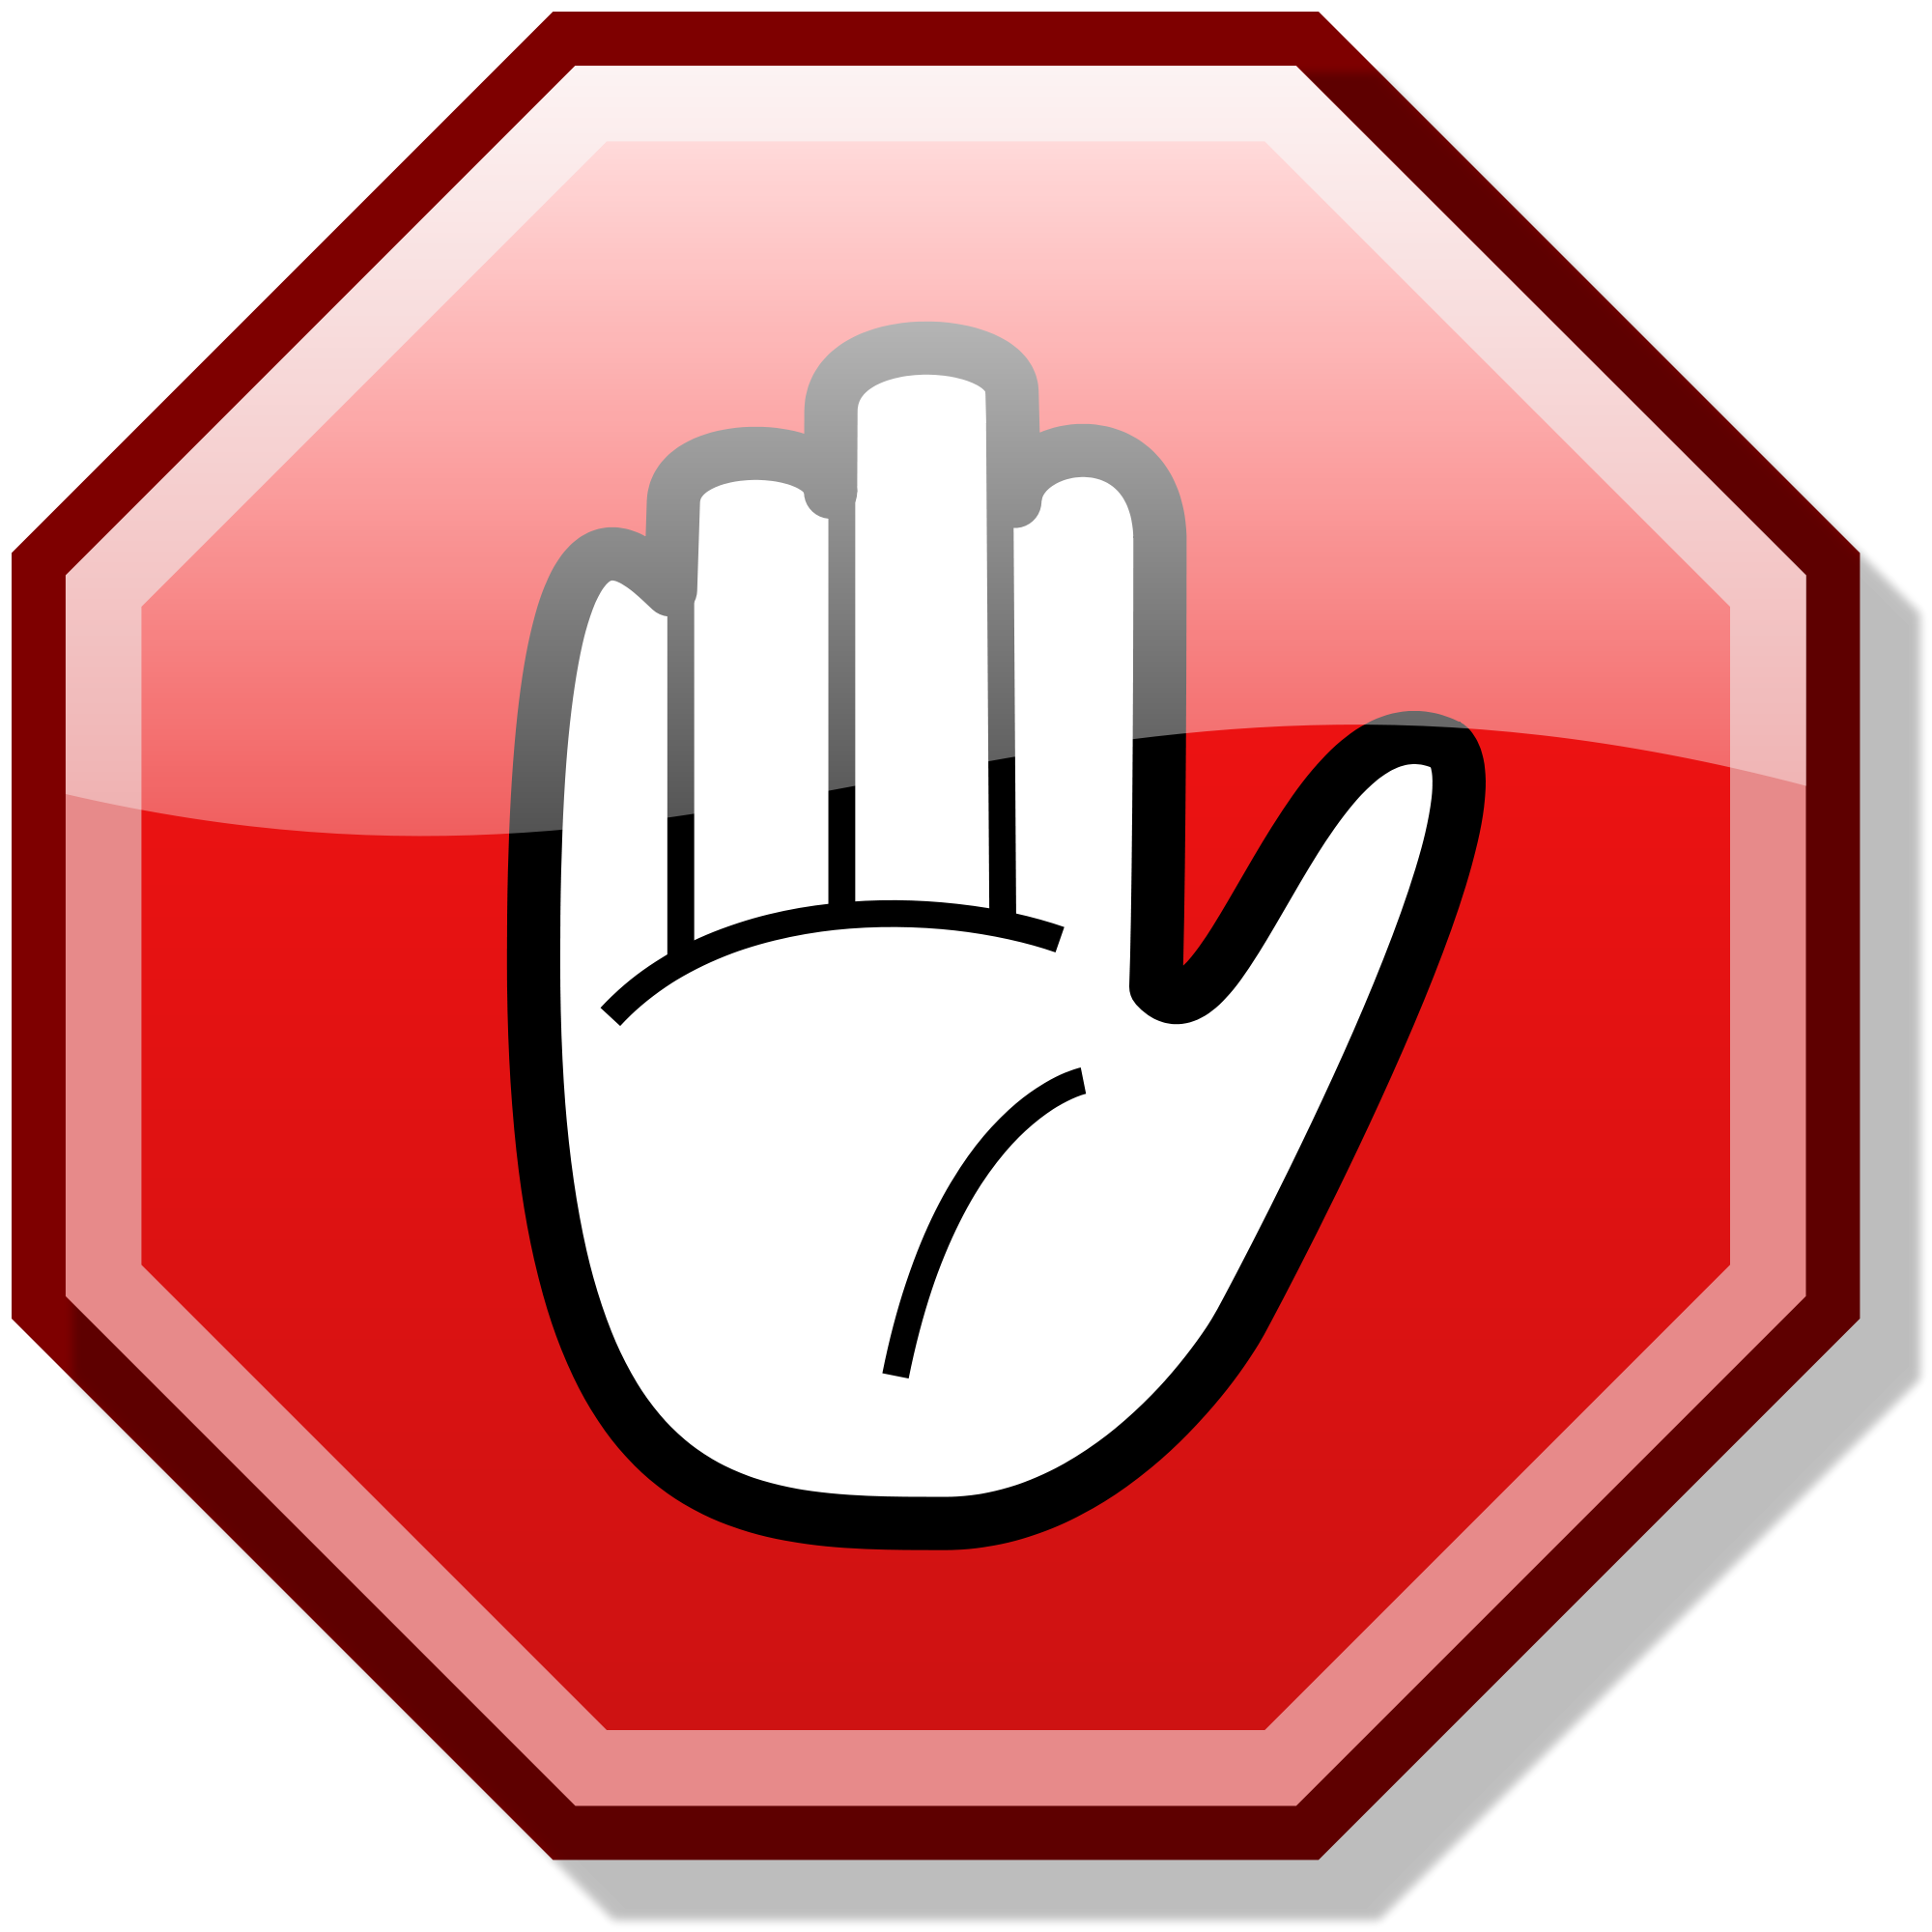 Image - Stop hand red.png | Pixar Wiki | Fandom powered by Wikia